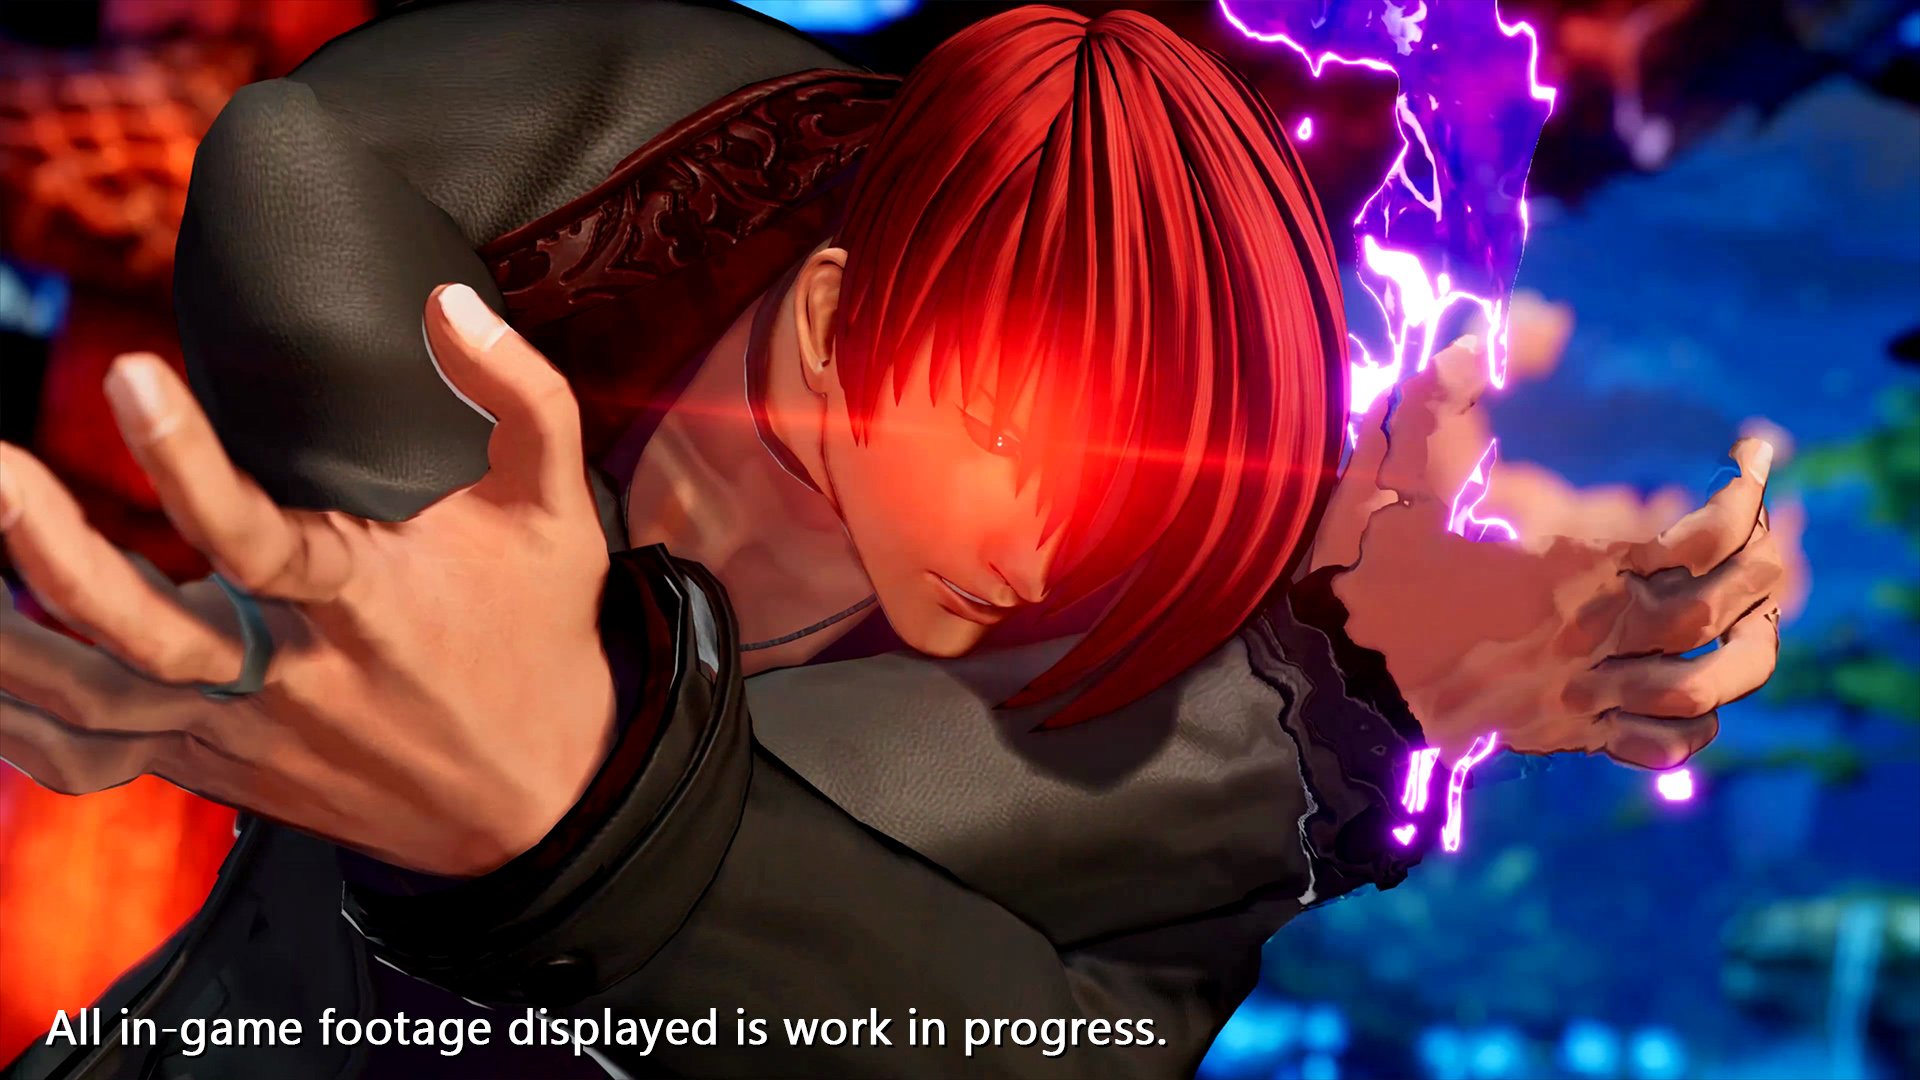 The King of Fighters XV Rom Package - Yagami Iori ver.- (PS4)